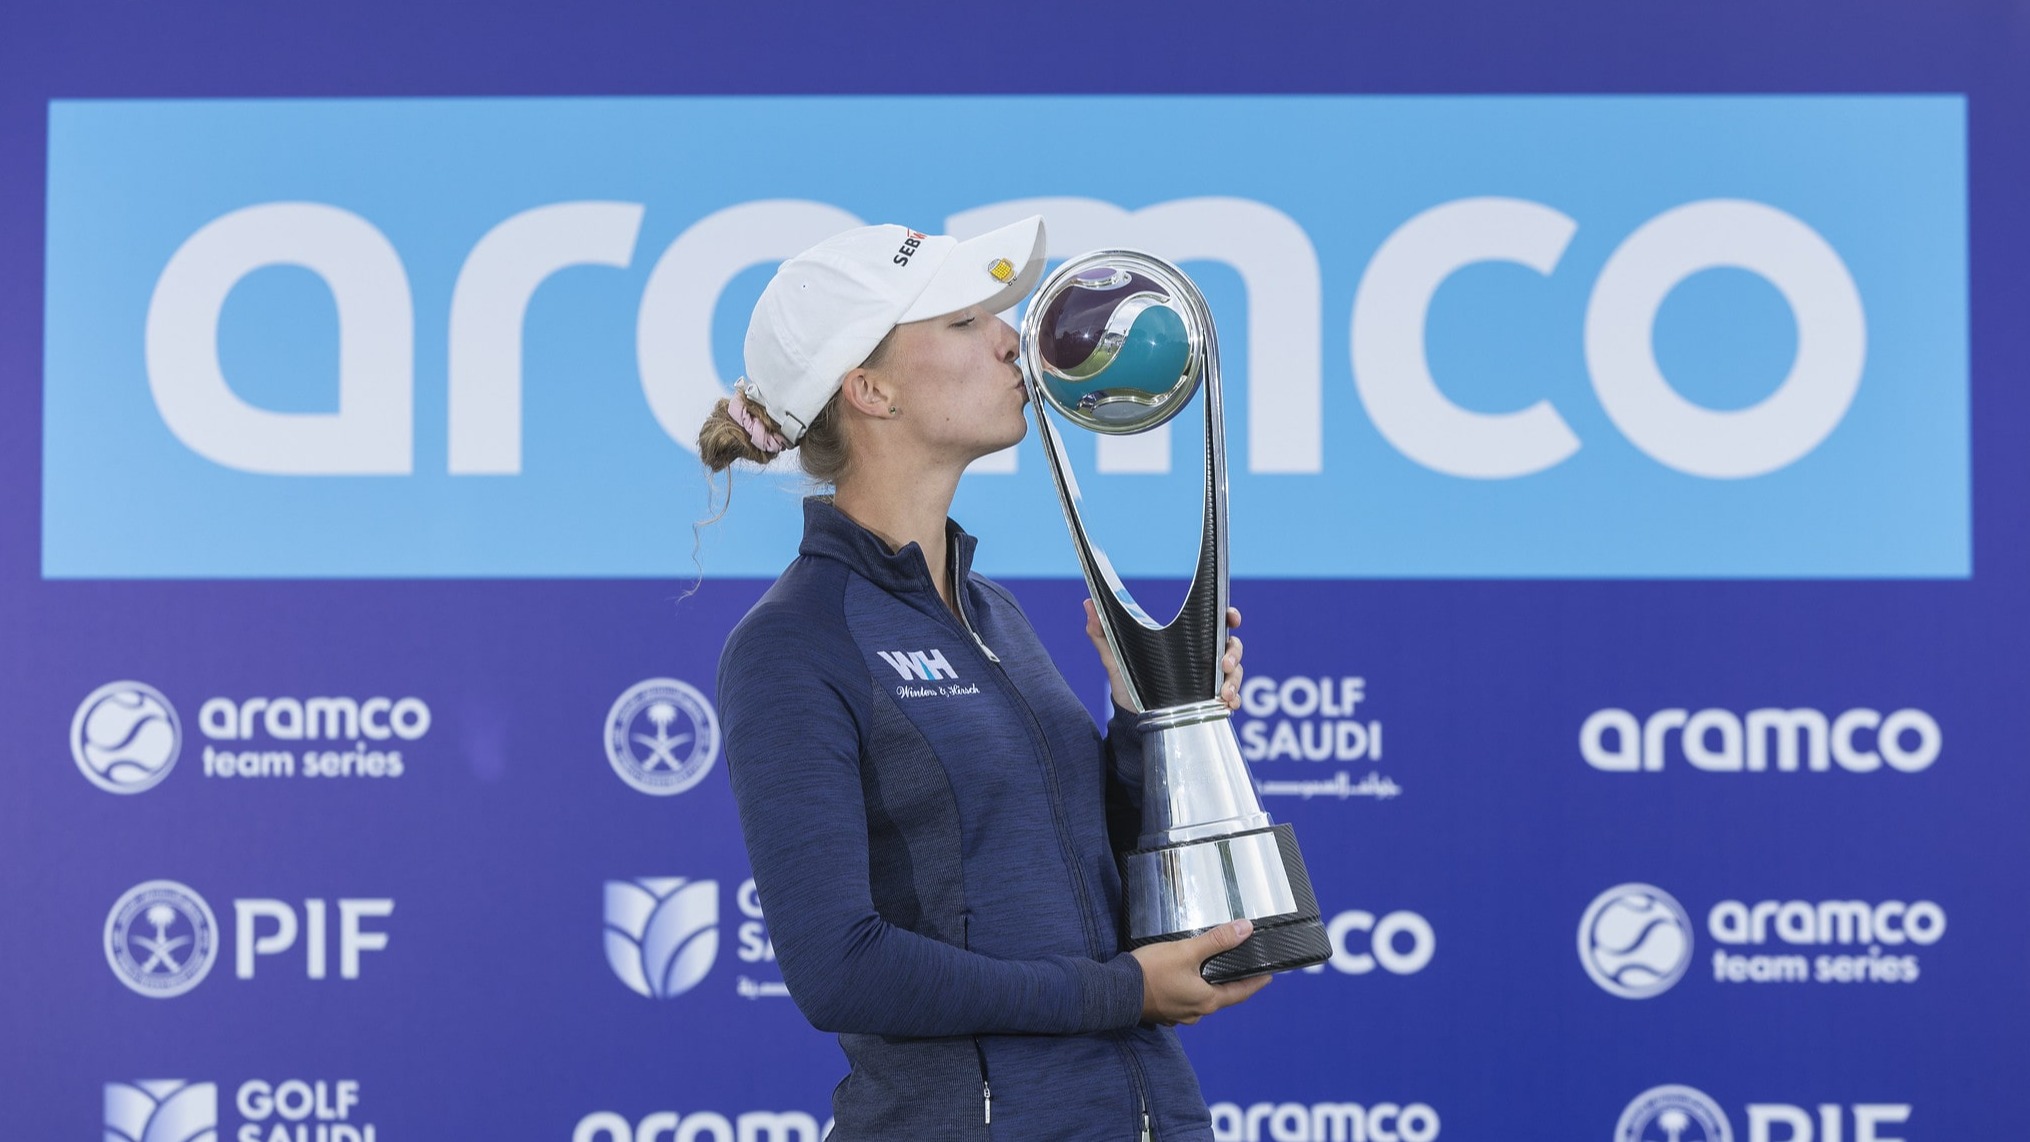 Alexandra Försterling holding the Aramco Team Series trophy against the sponsors board.